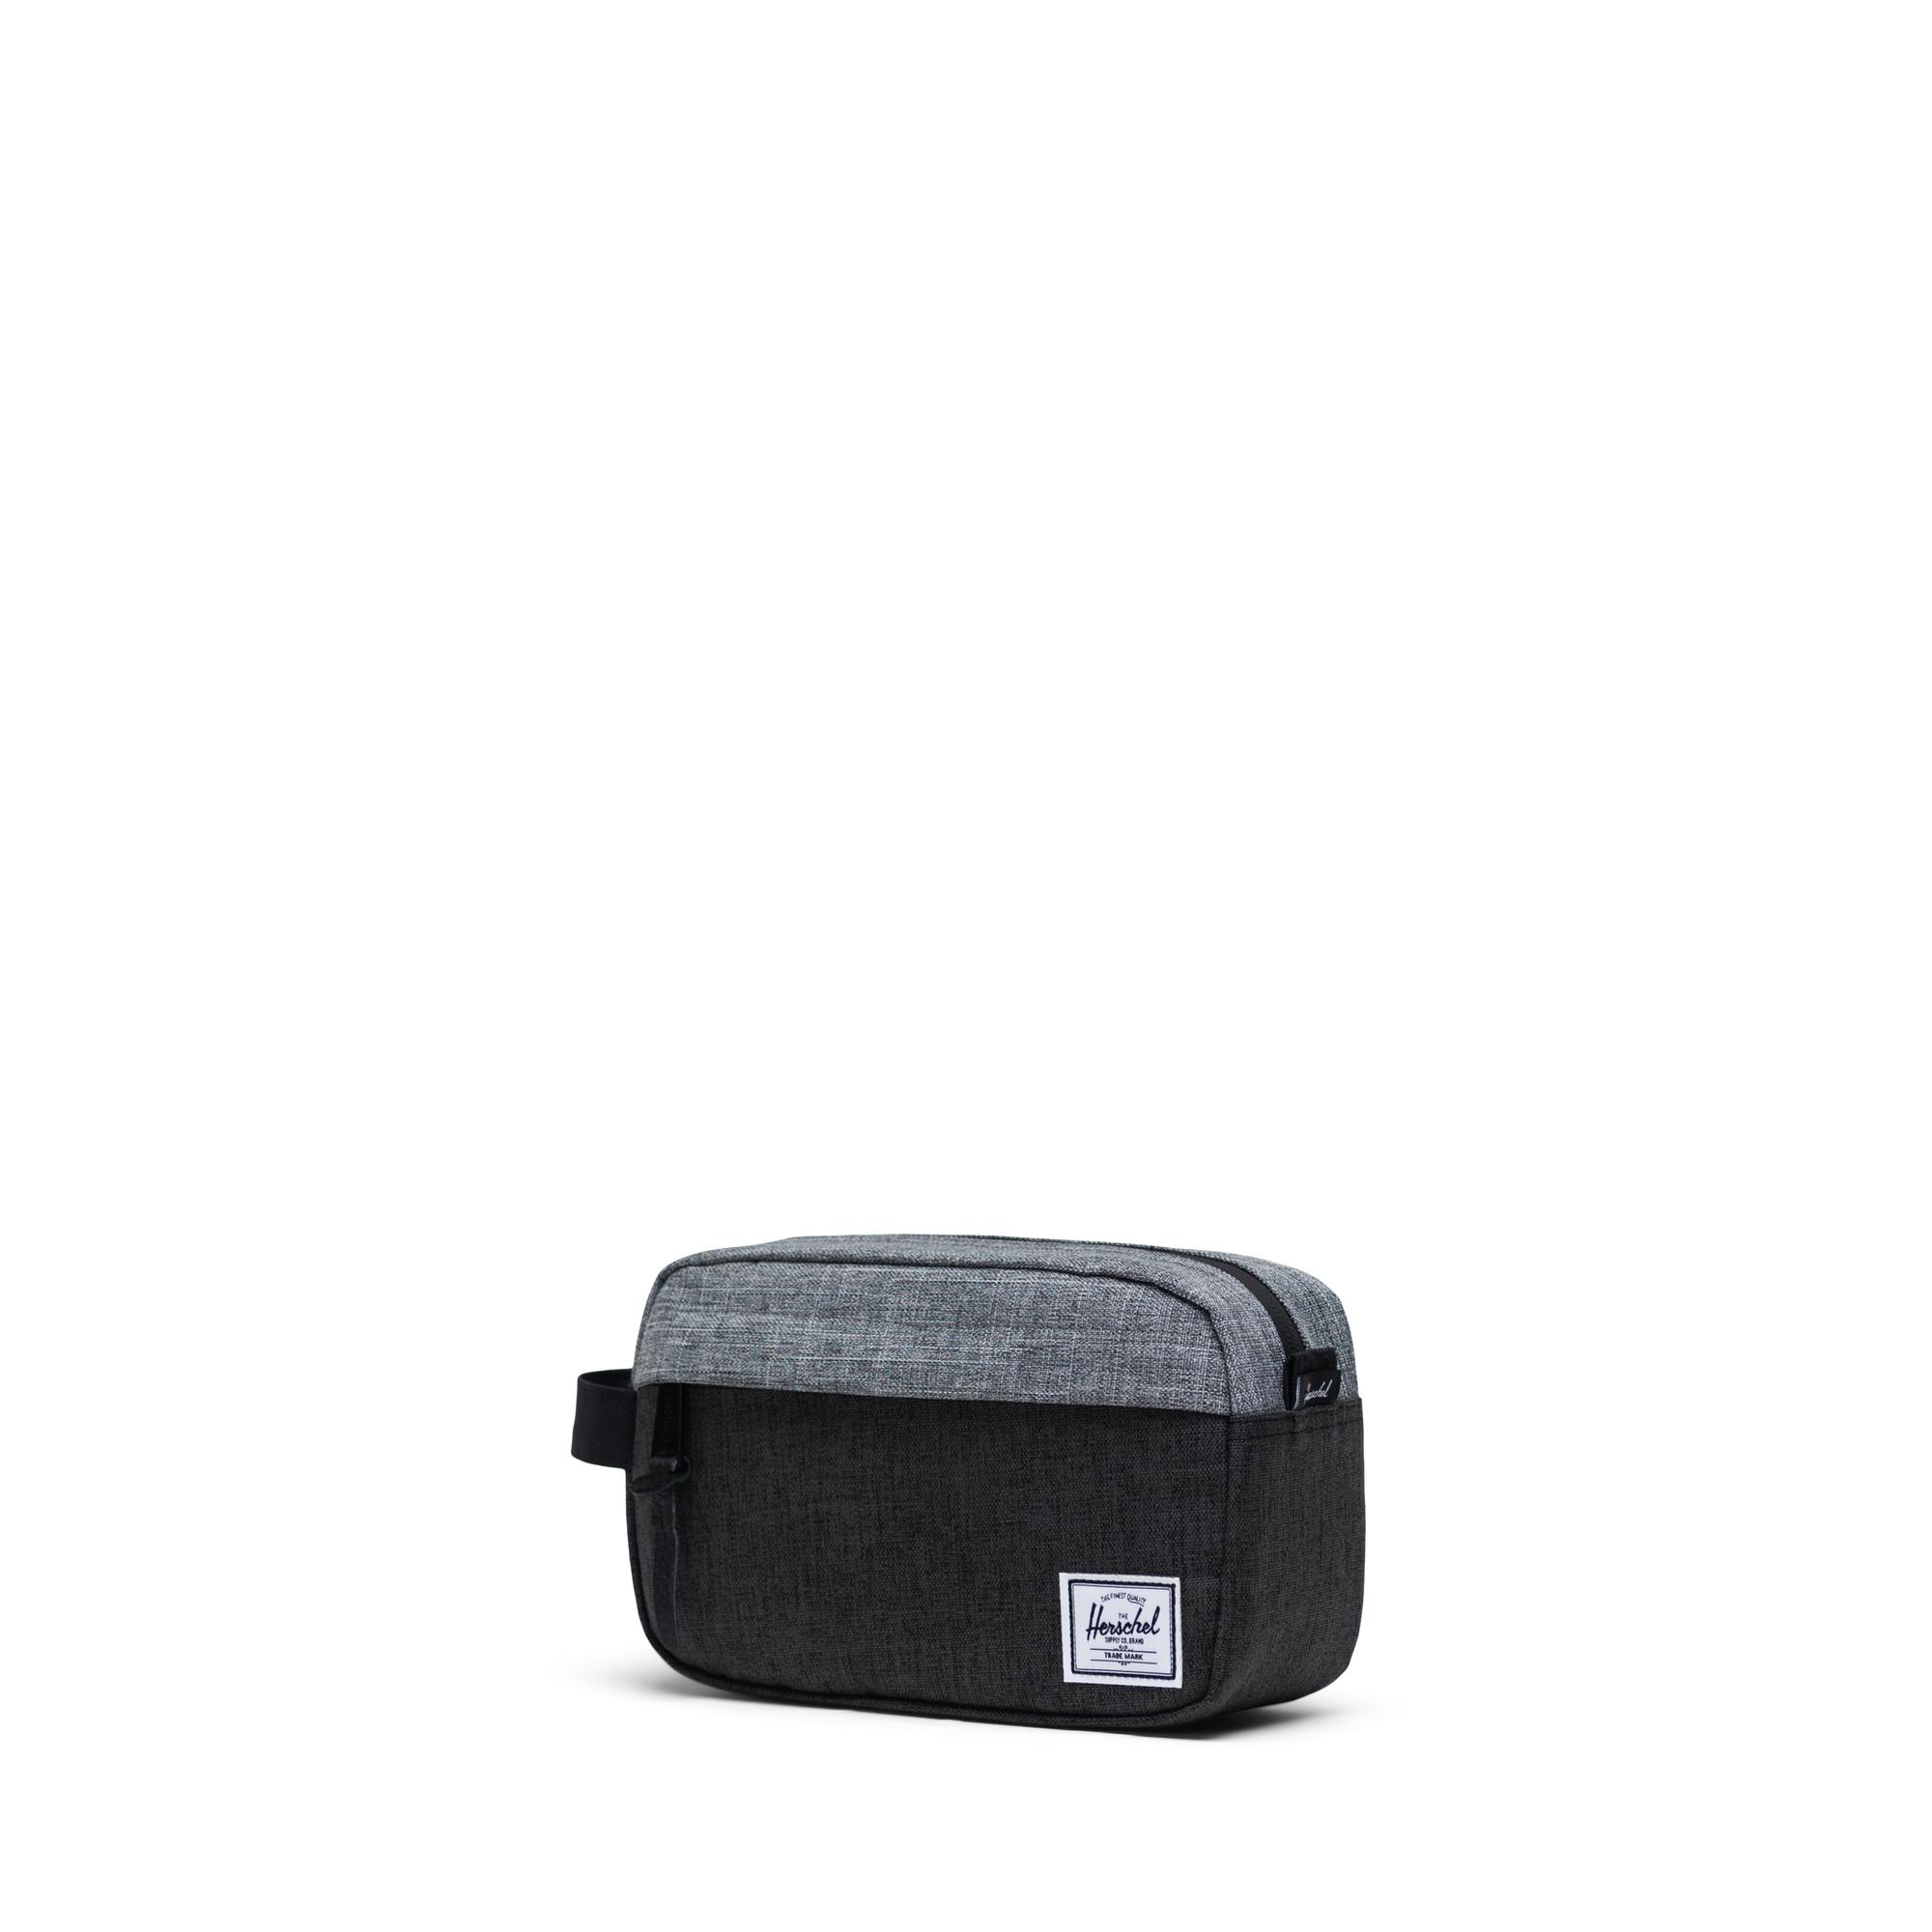 Chapter Travel Kit Carry-On Bag | Herschel Supply Co.